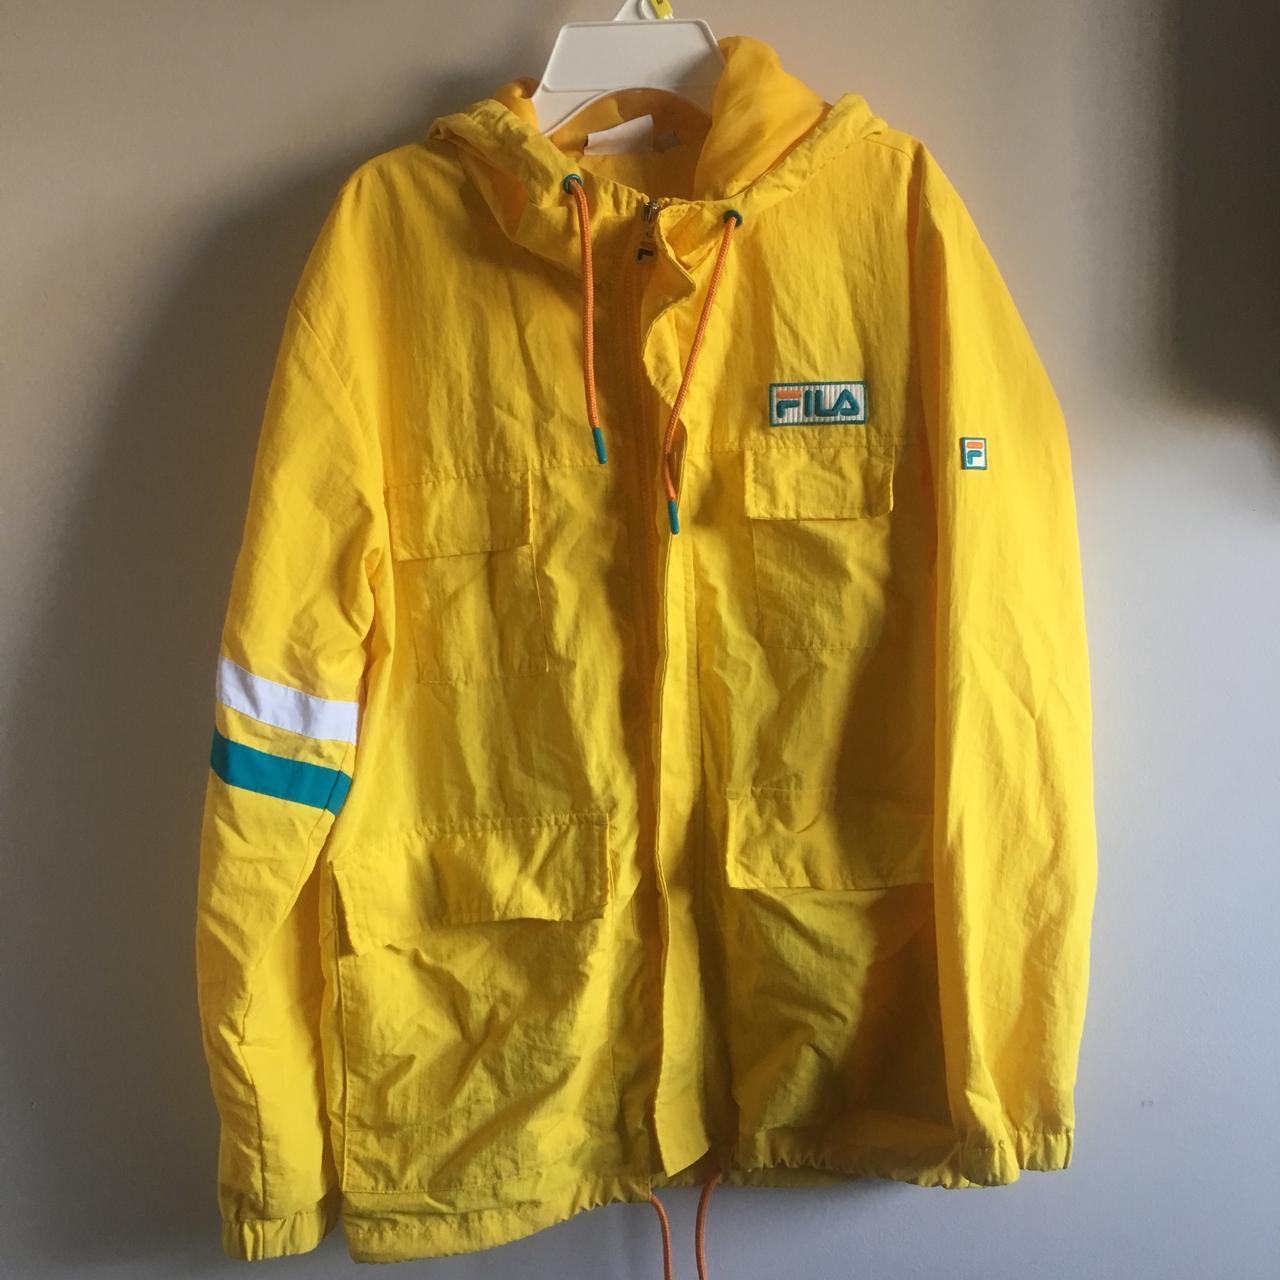 Fila x UO Yellow Jacket 💛 Love all the details and... - Depop